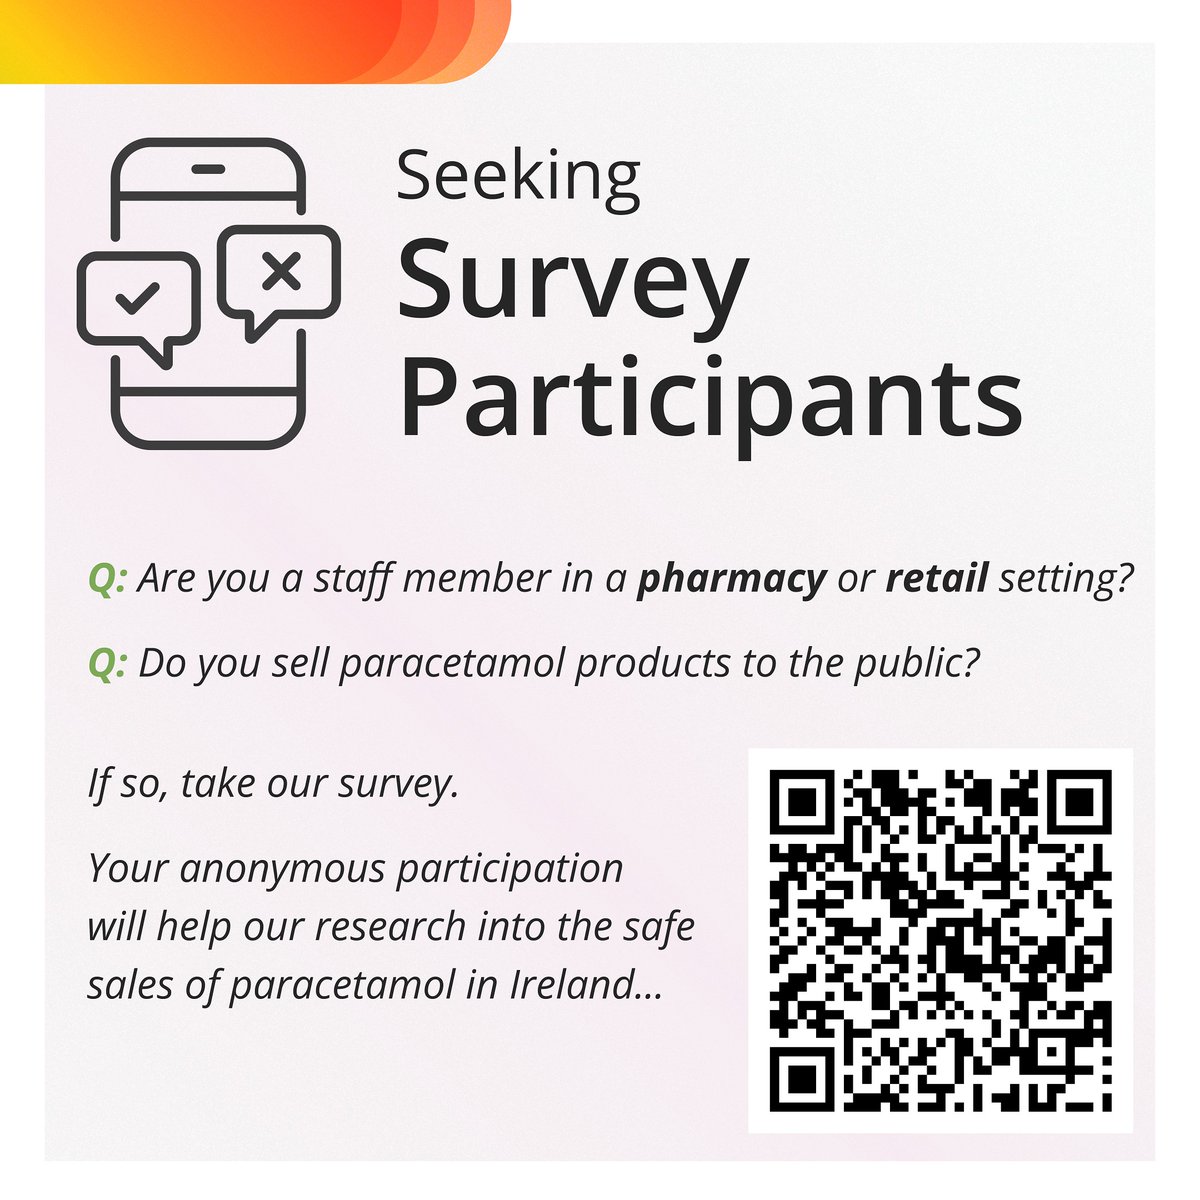 Do you work in pharmacy or retail settings, and sell paracetamol products to the public? If so, @NSRFIreland and partners want to hear from you! #RetailExcellence #ThinkPharmacy #PharmacyWorkforce ucc.qualtrics.com/jfe/form/SV_23…